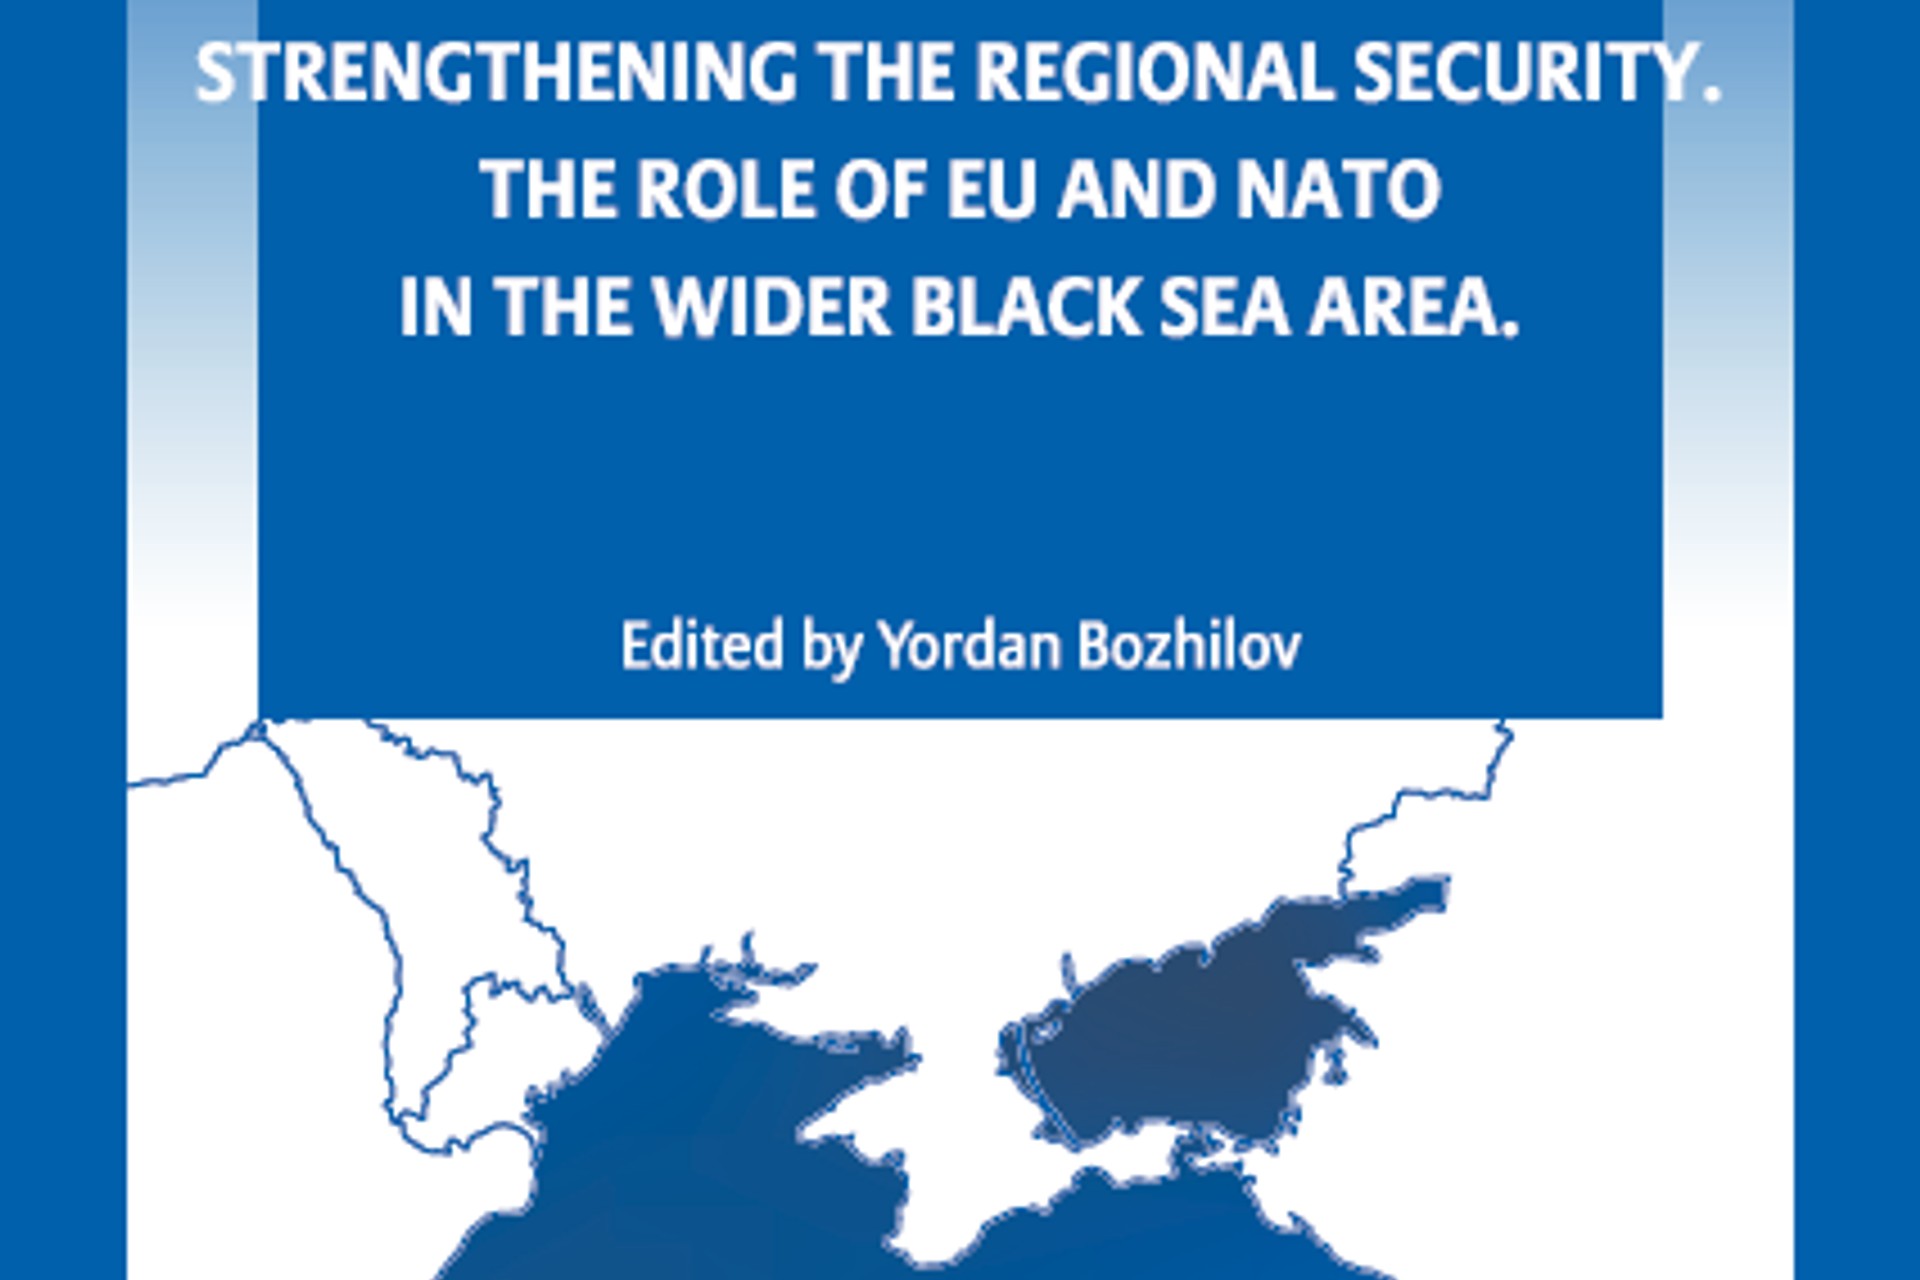 Strengthening the regional security. The role of NATO and the EU in the wider Black Sea area.